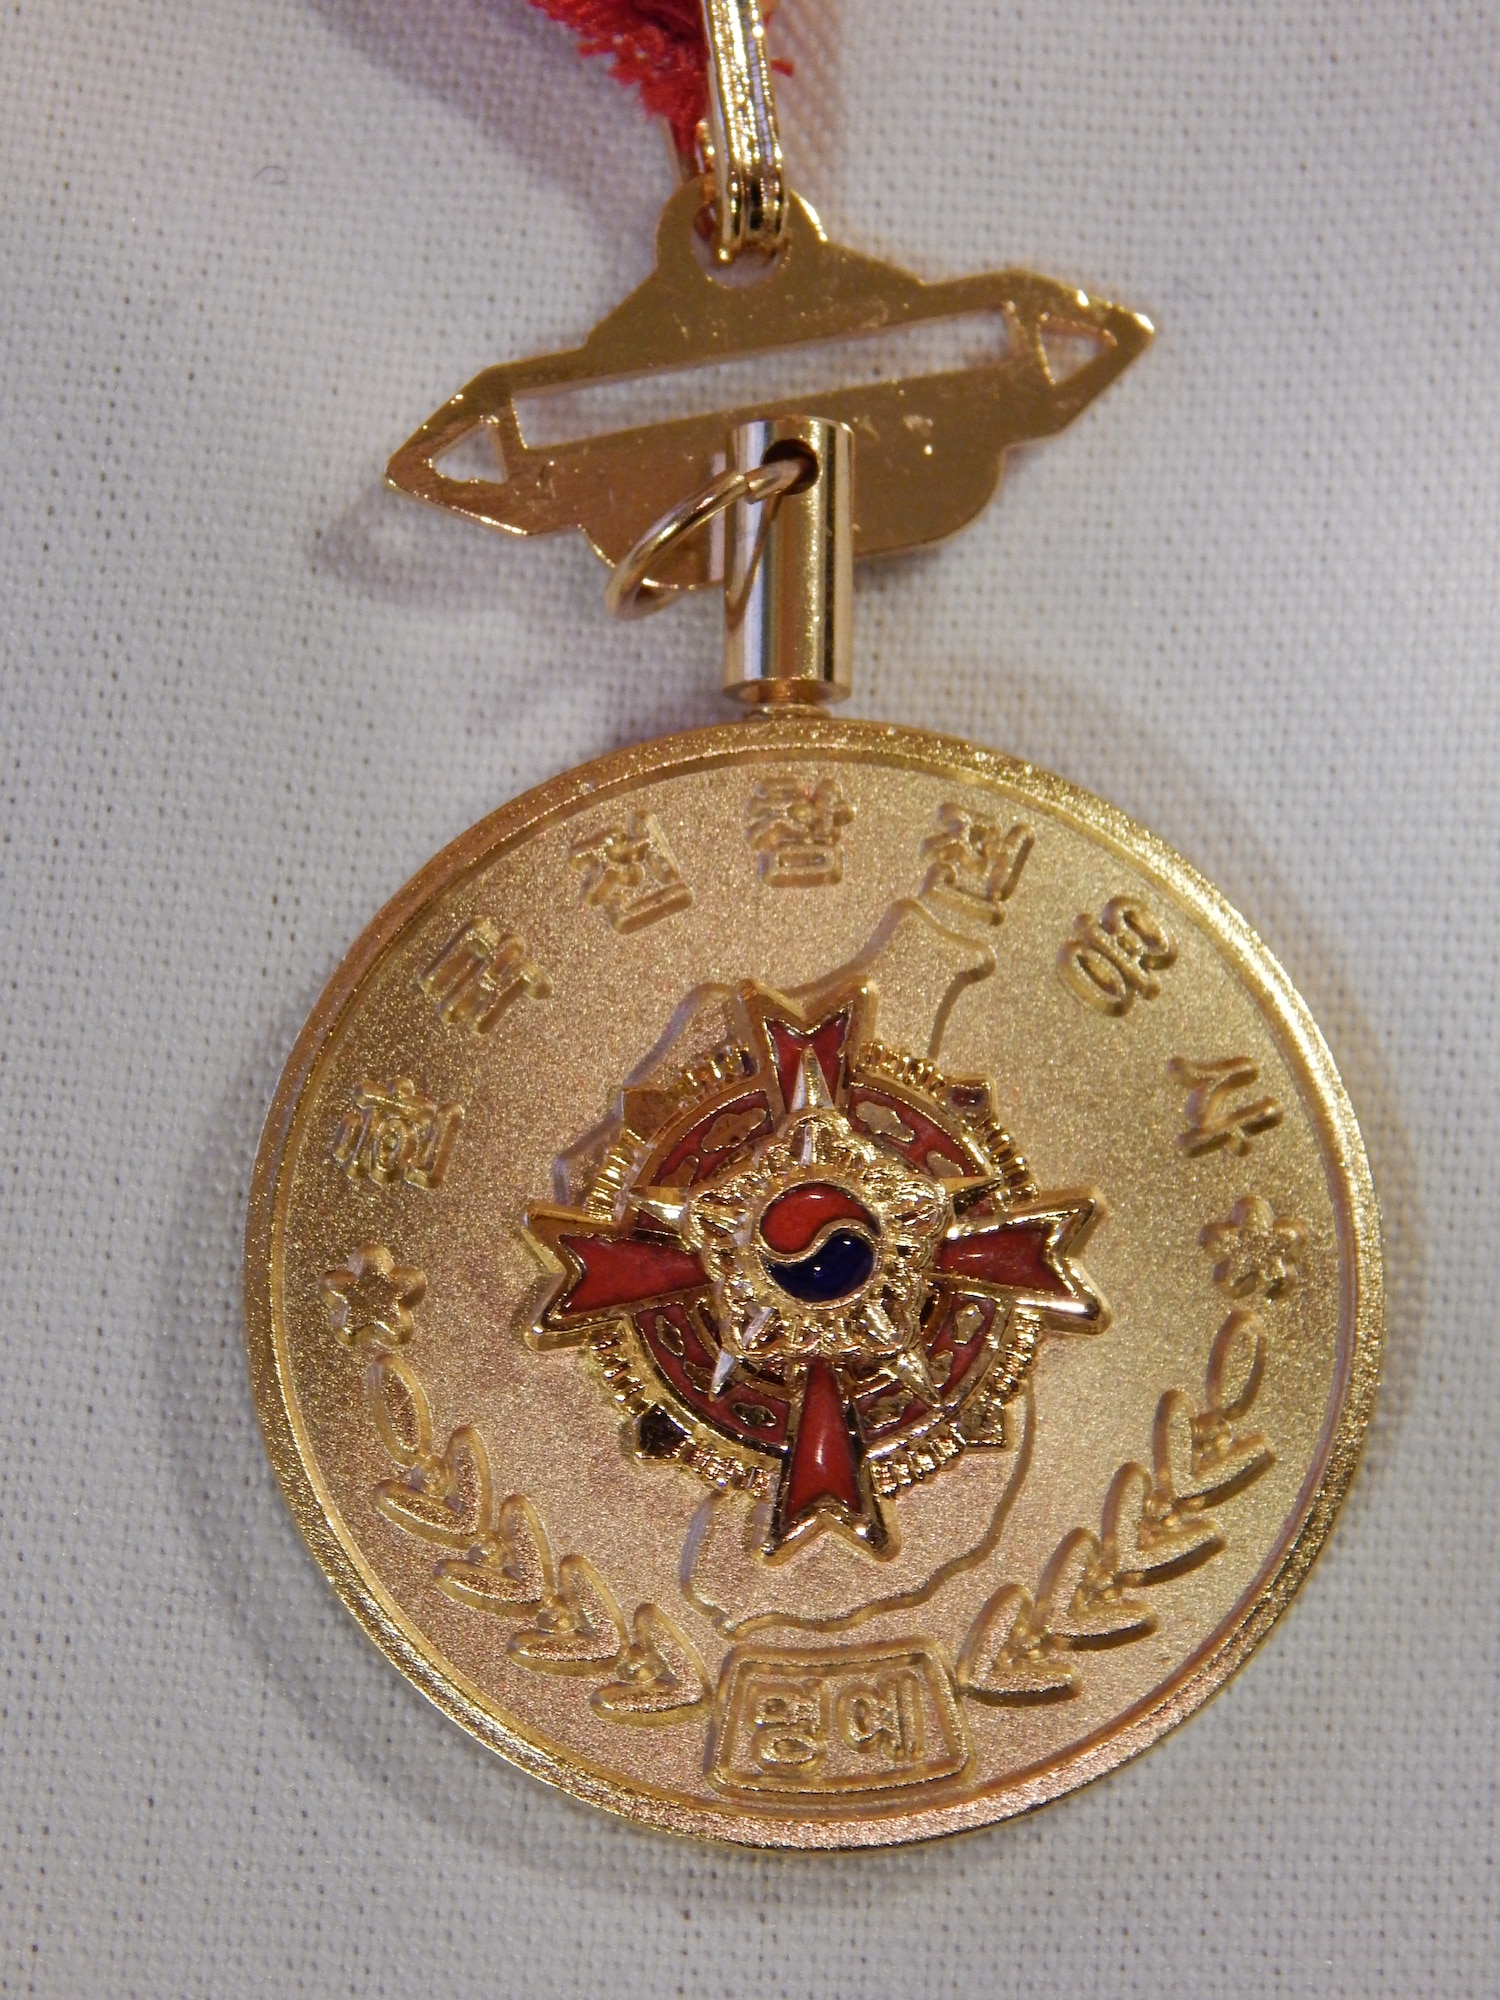 The Korean Ambassador for Peace Medal is awarded to veterans who served during the Korean War from June 25, 1950, to July 27, 1953.   Veterans who served in United Nations peacekeeping operations until the end of 1955 and U.S. Navy members who served aboard Navy vessels in Korean waters from 1950 to 1953 are also eligible for the commemorative medals. (U.S. Air Force photo/Christine Spargur)